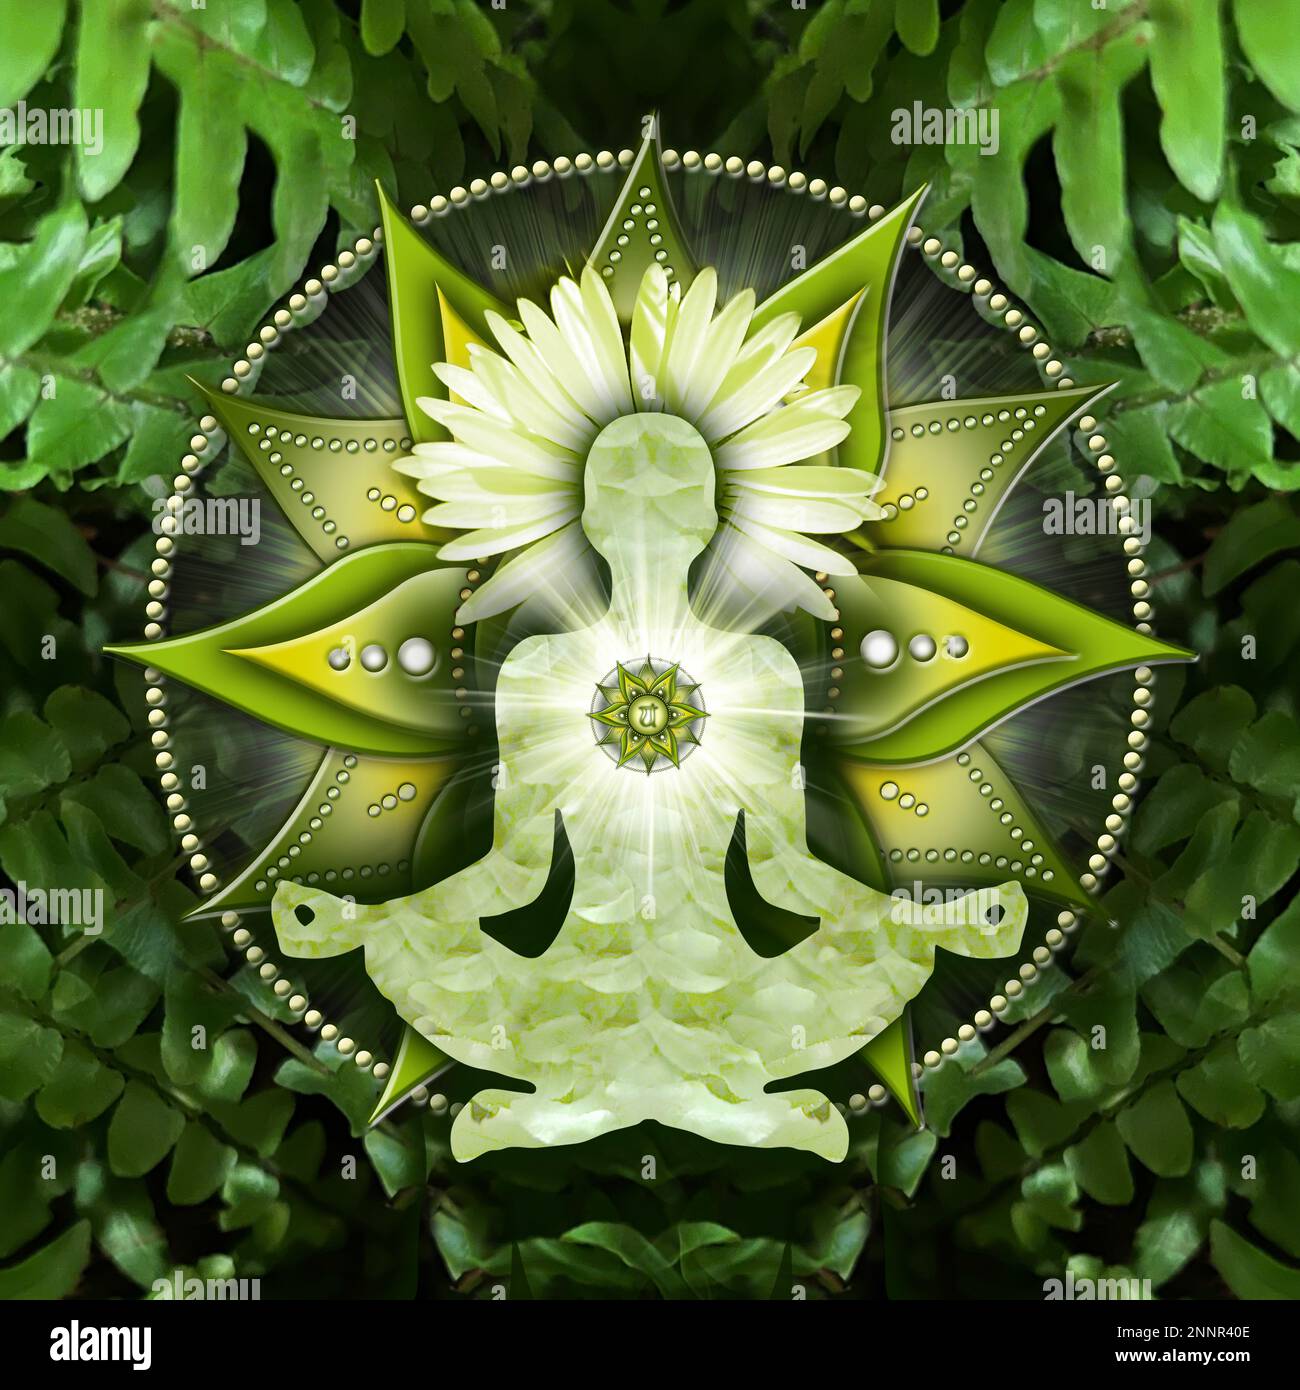 Heart chakra meditation in yoga lotus pose, in front of anahata chakra symbol and calming, green ferns. Stock Photo